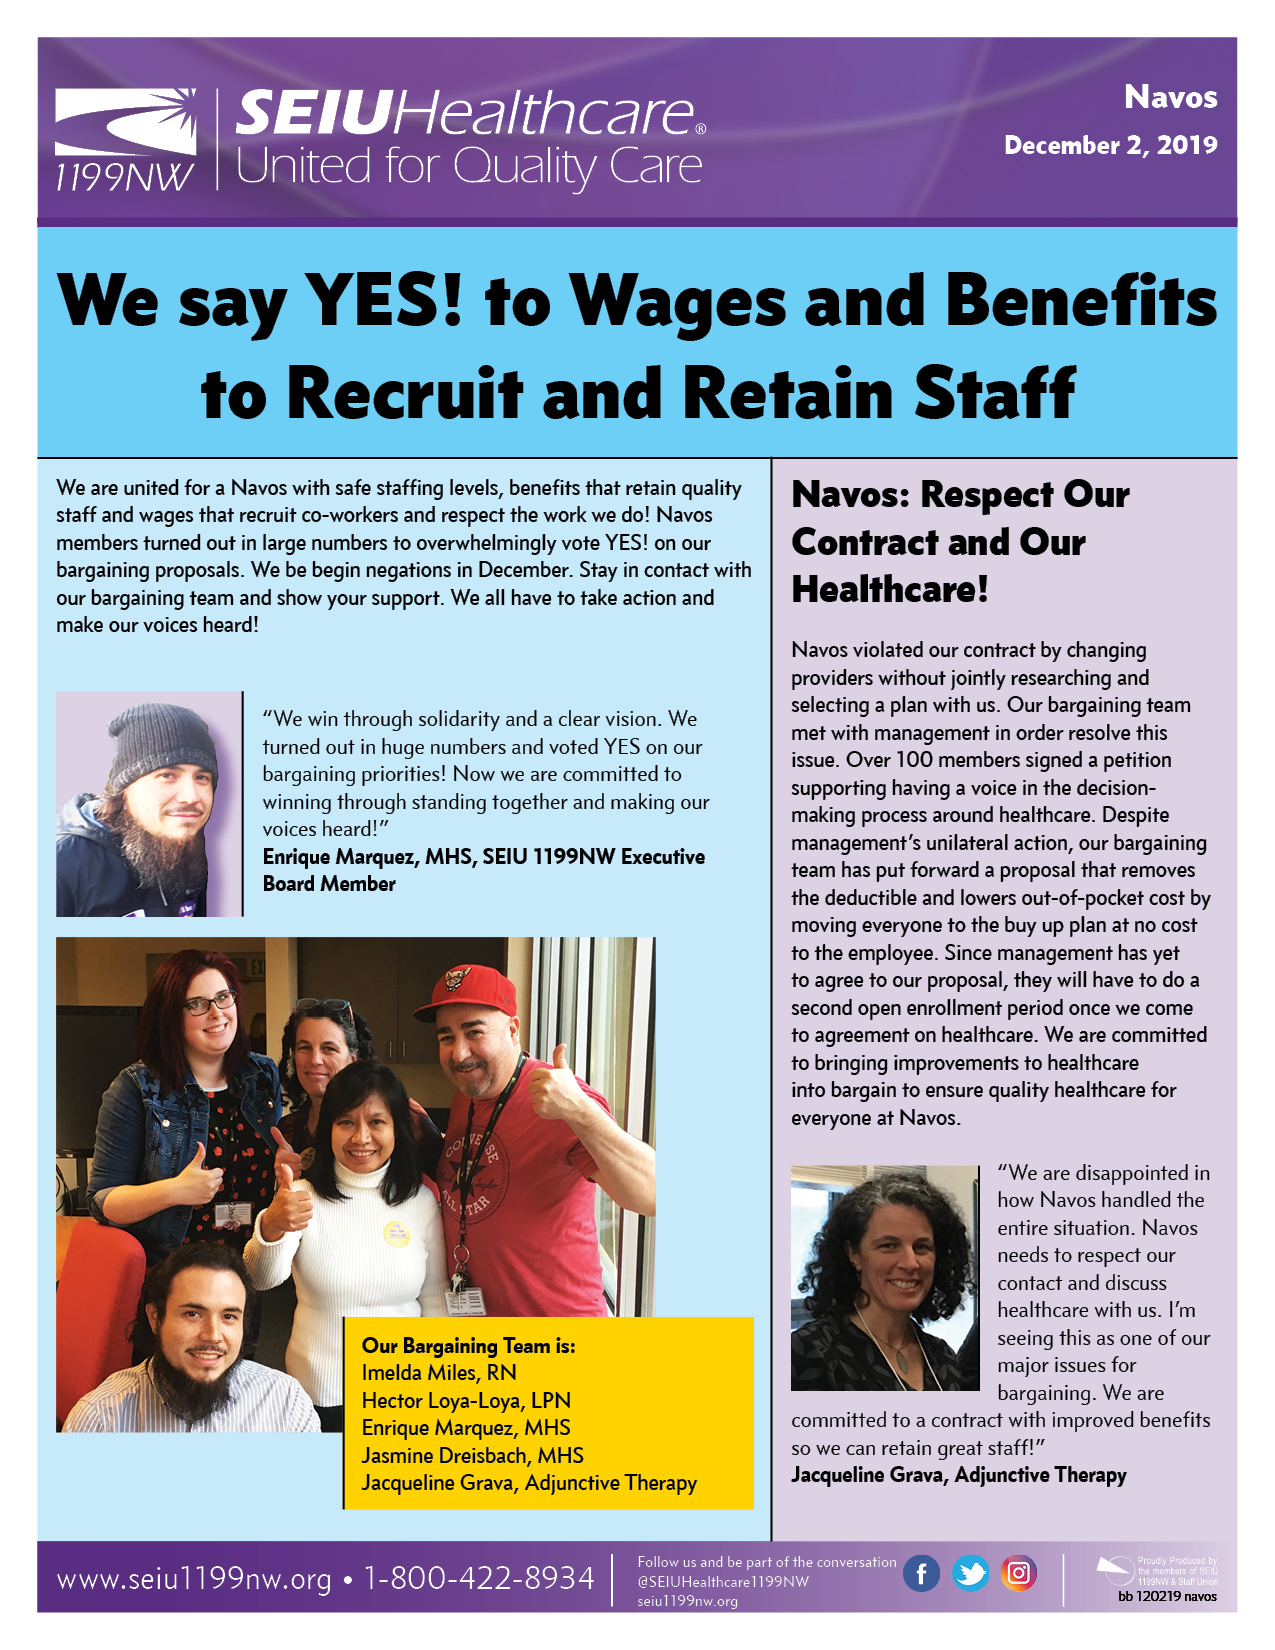 We say YES! to Wages and Benefits to Recruit and Retain Staff